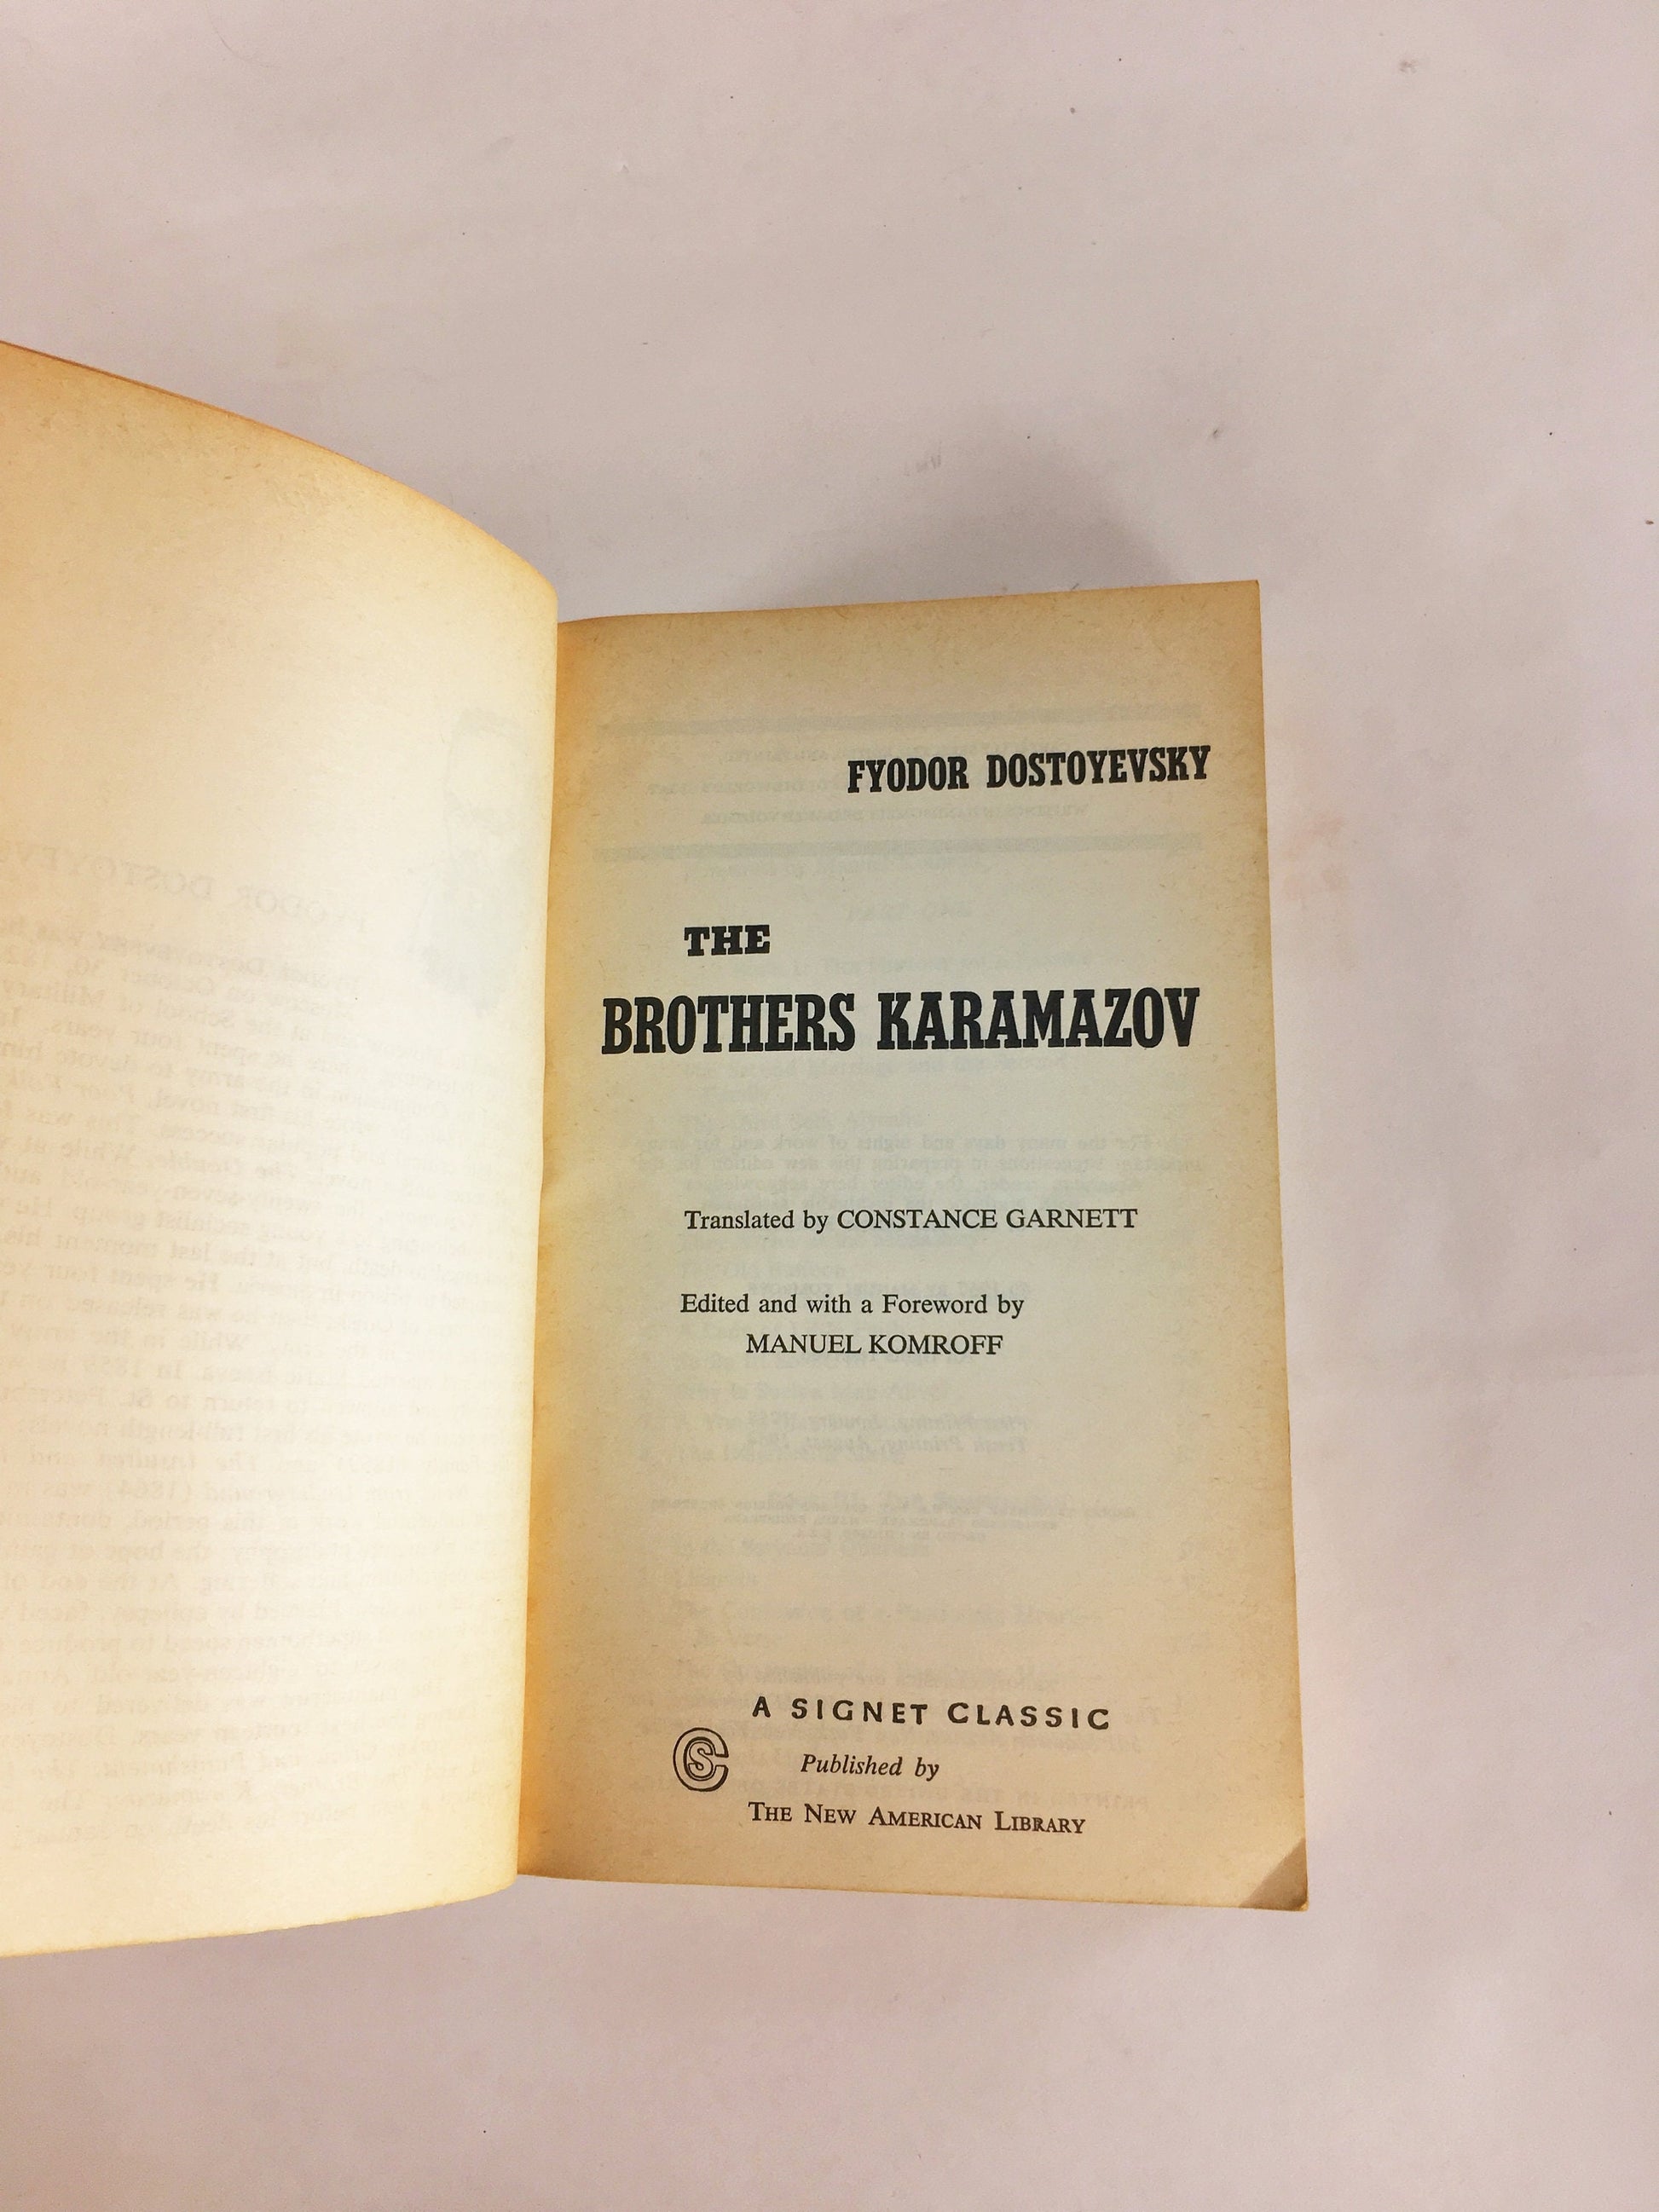 Brothers Karamazov by Fyodor Dostoevsky. Vintage paperback book circa 1964. Examines ethics of God and free will. Signet Classic